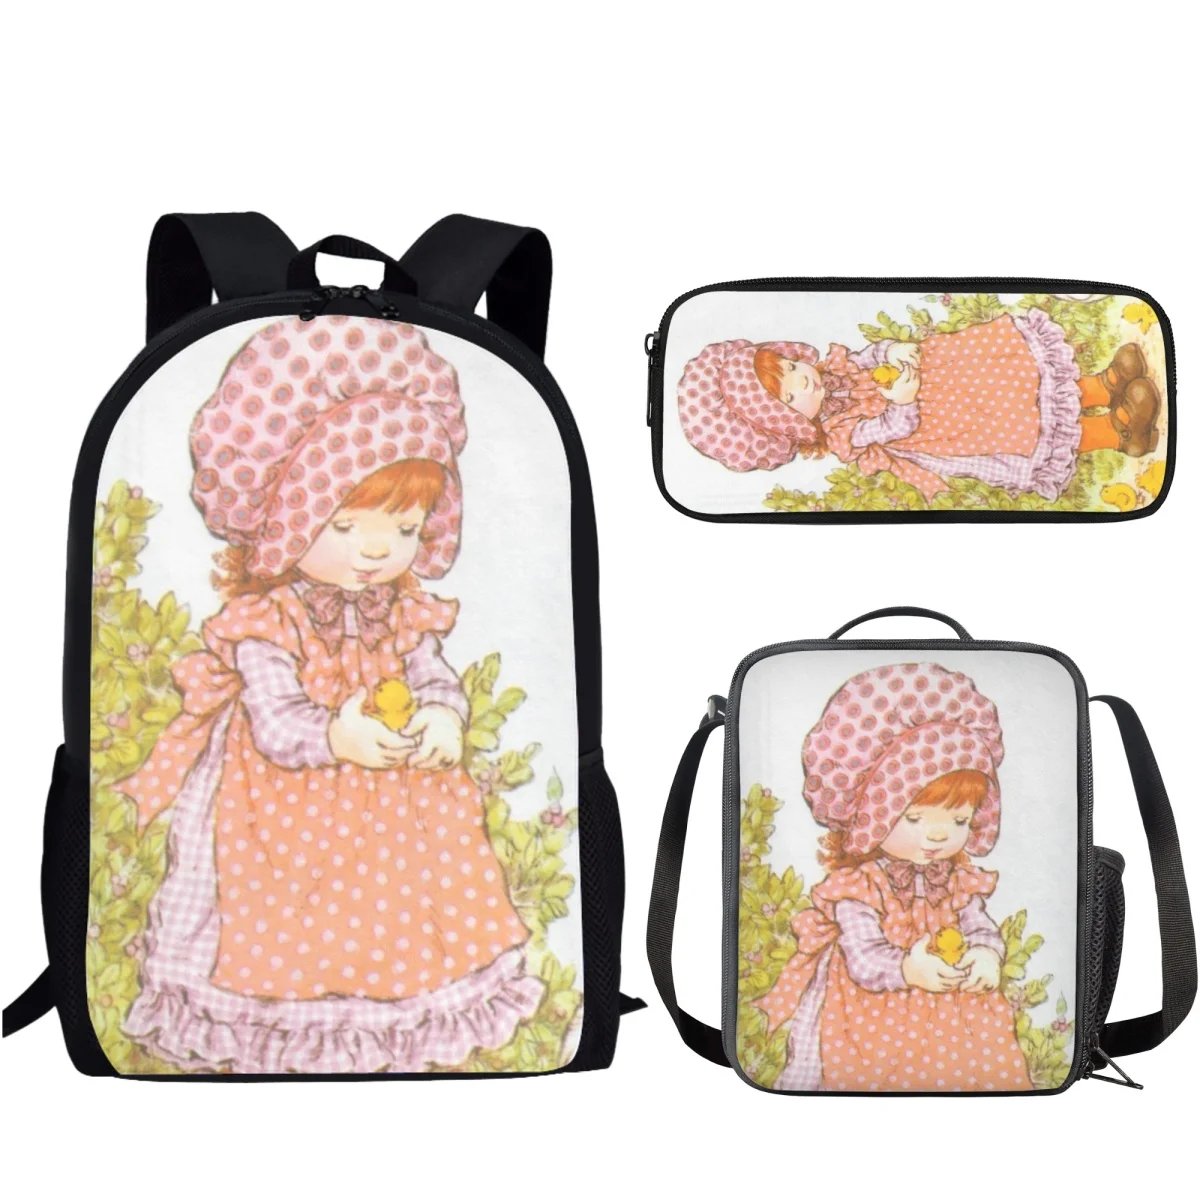 Cute Sarah Kay Design Children Backpack with Lunch Bag/Pencil Case Large Capacity School Bags Set for Kids Girls Casual 3pcs Bag